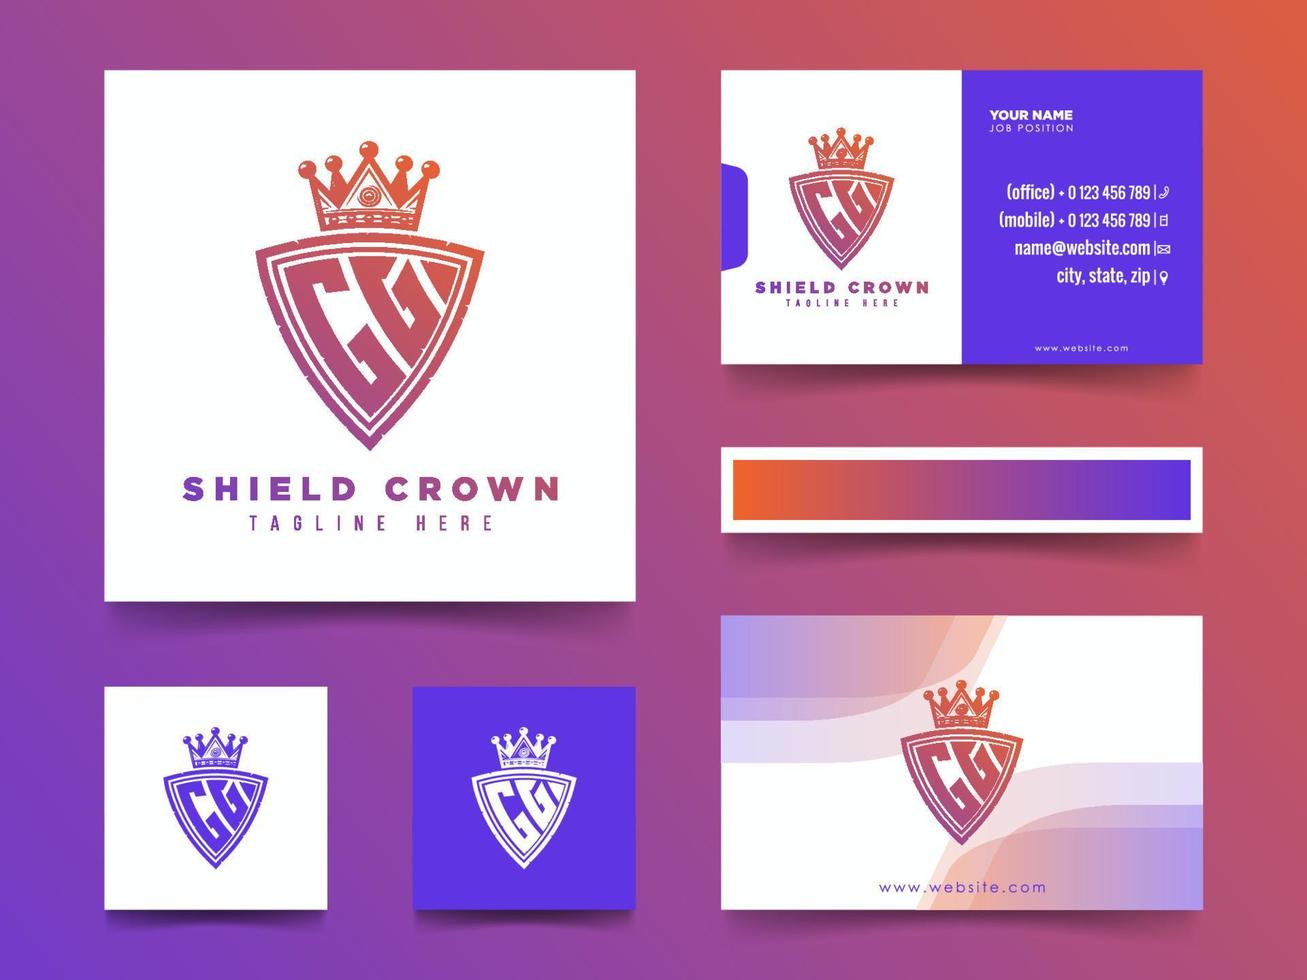 Set of creative GG monogram logo with shield crown color gradient style vector